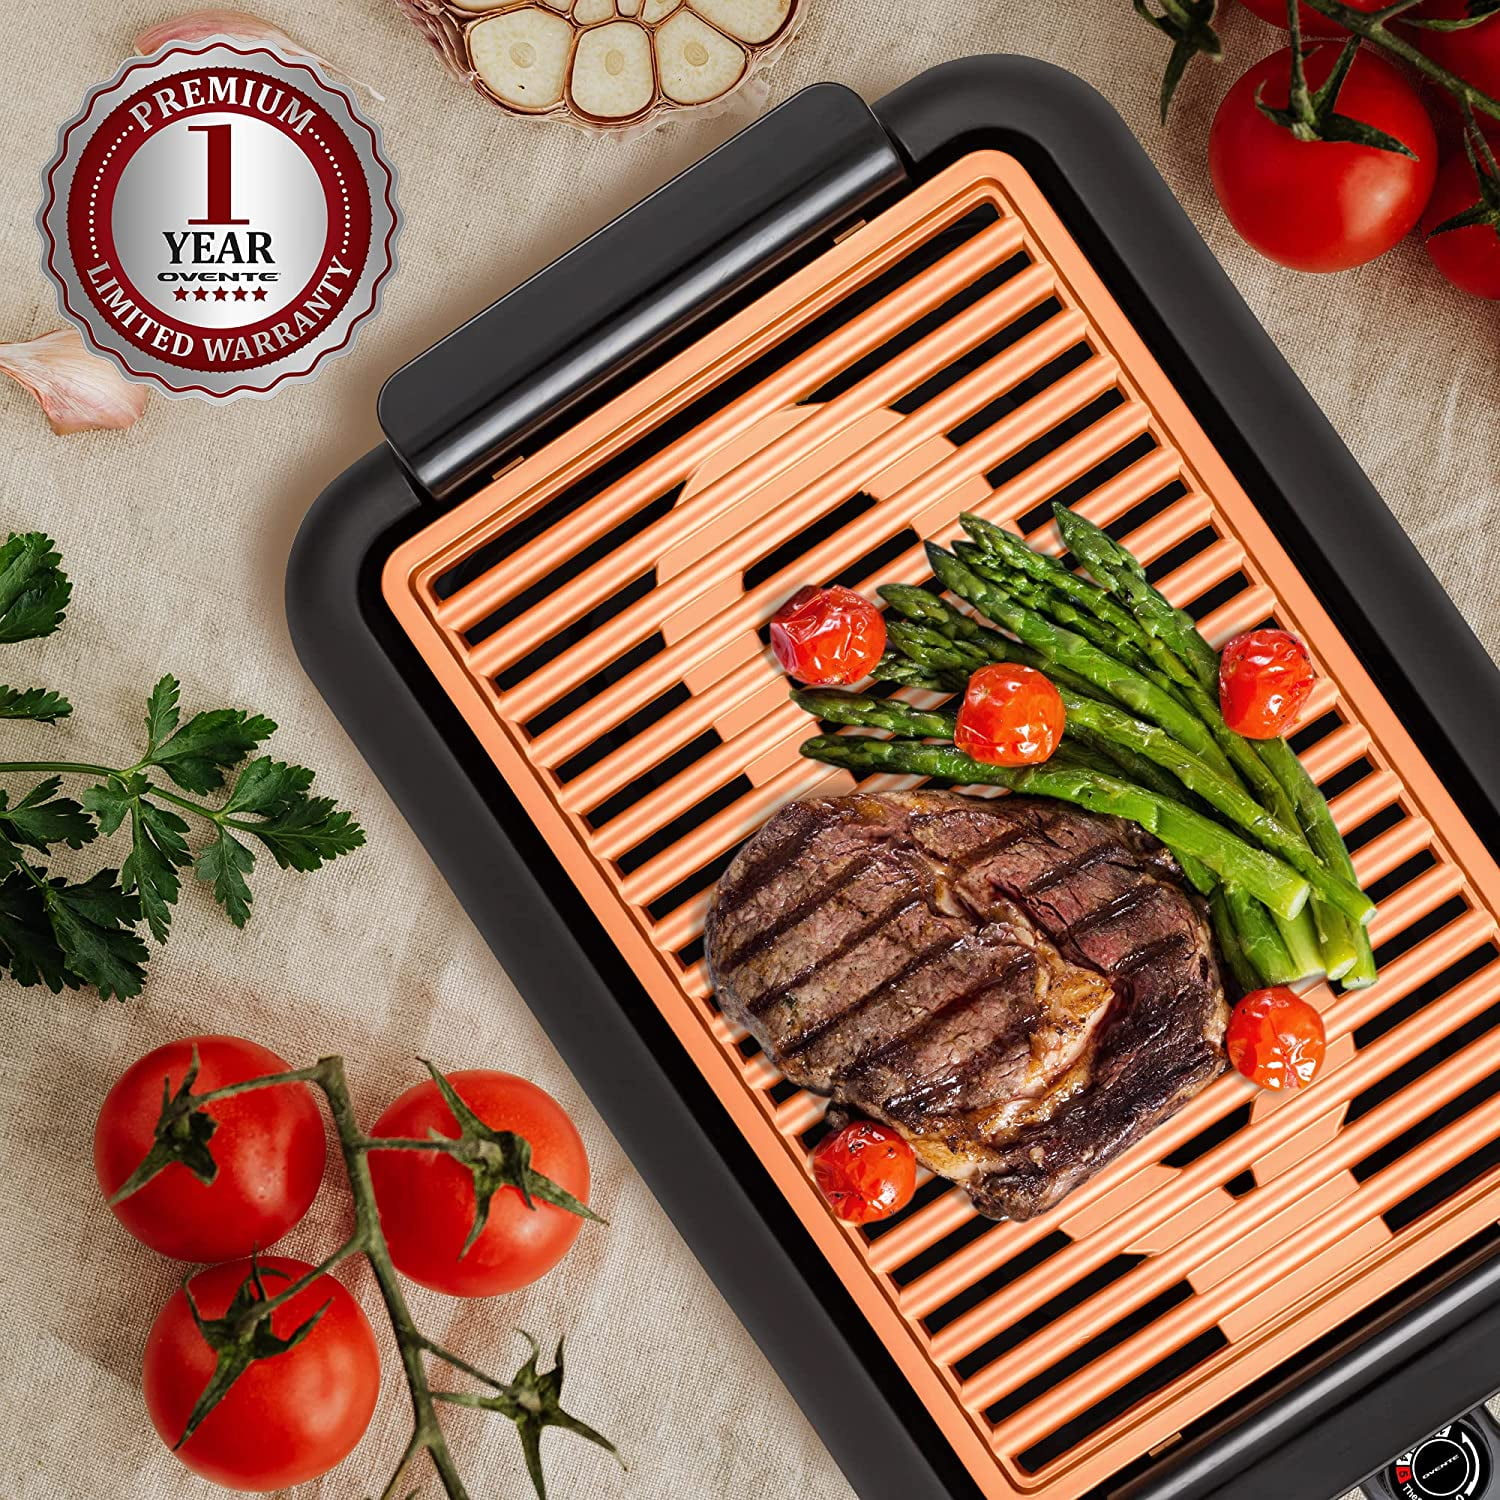 Montgomery Ward Chef Tested Electric Grill- Indoor/Outdoor Use, Removable  Cast Aluminum Griddle, Temperature Control, Drip Tray, Warming Drawer, 1350